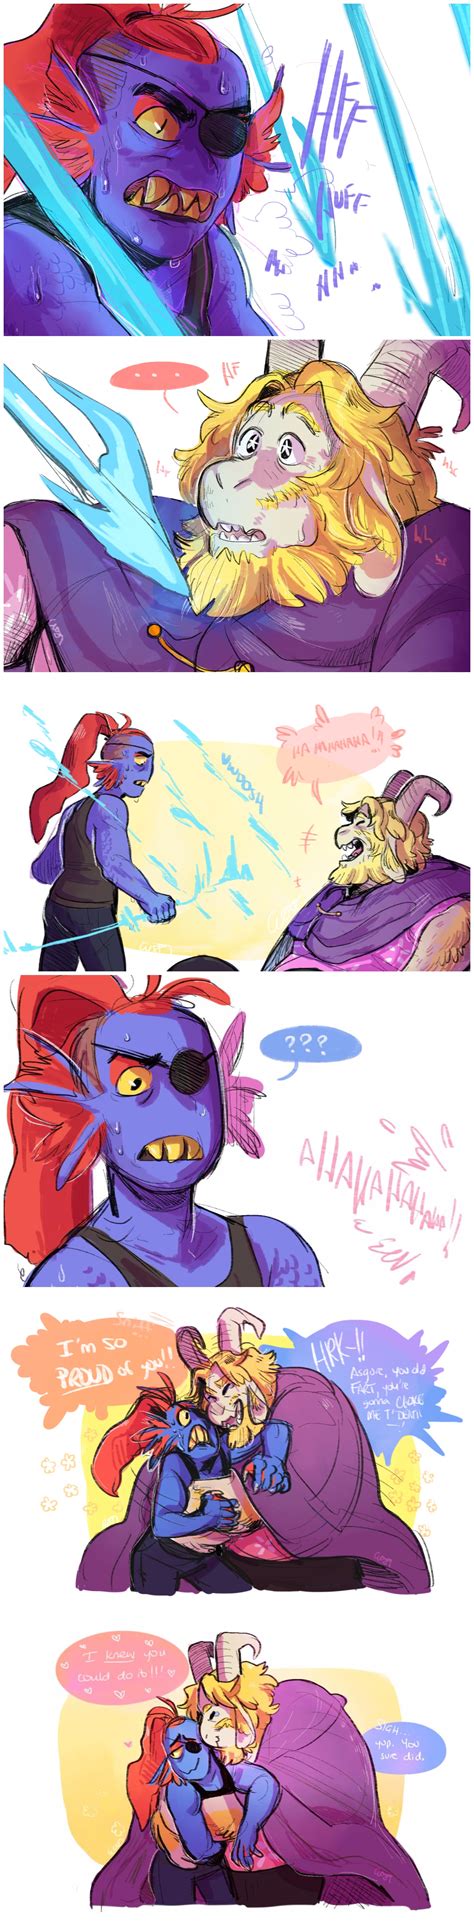 Now Im Not Hating On Alphys And Undyne At All But Part Of Me Likes